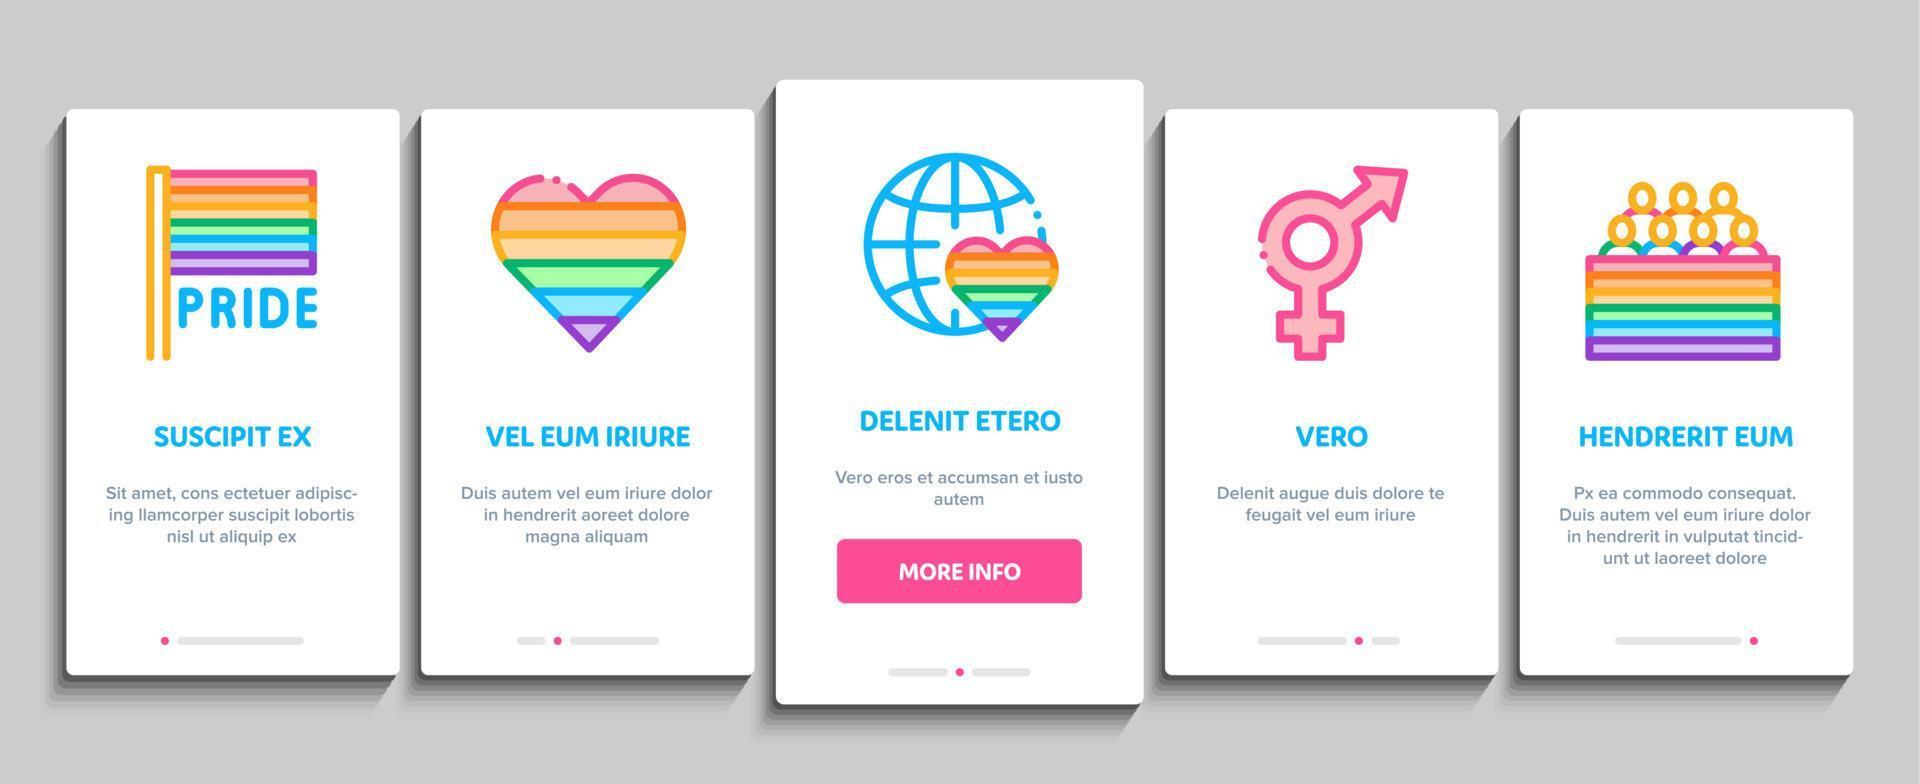 lgbt omosessuale gay onboarding elementi icone impostato vettore